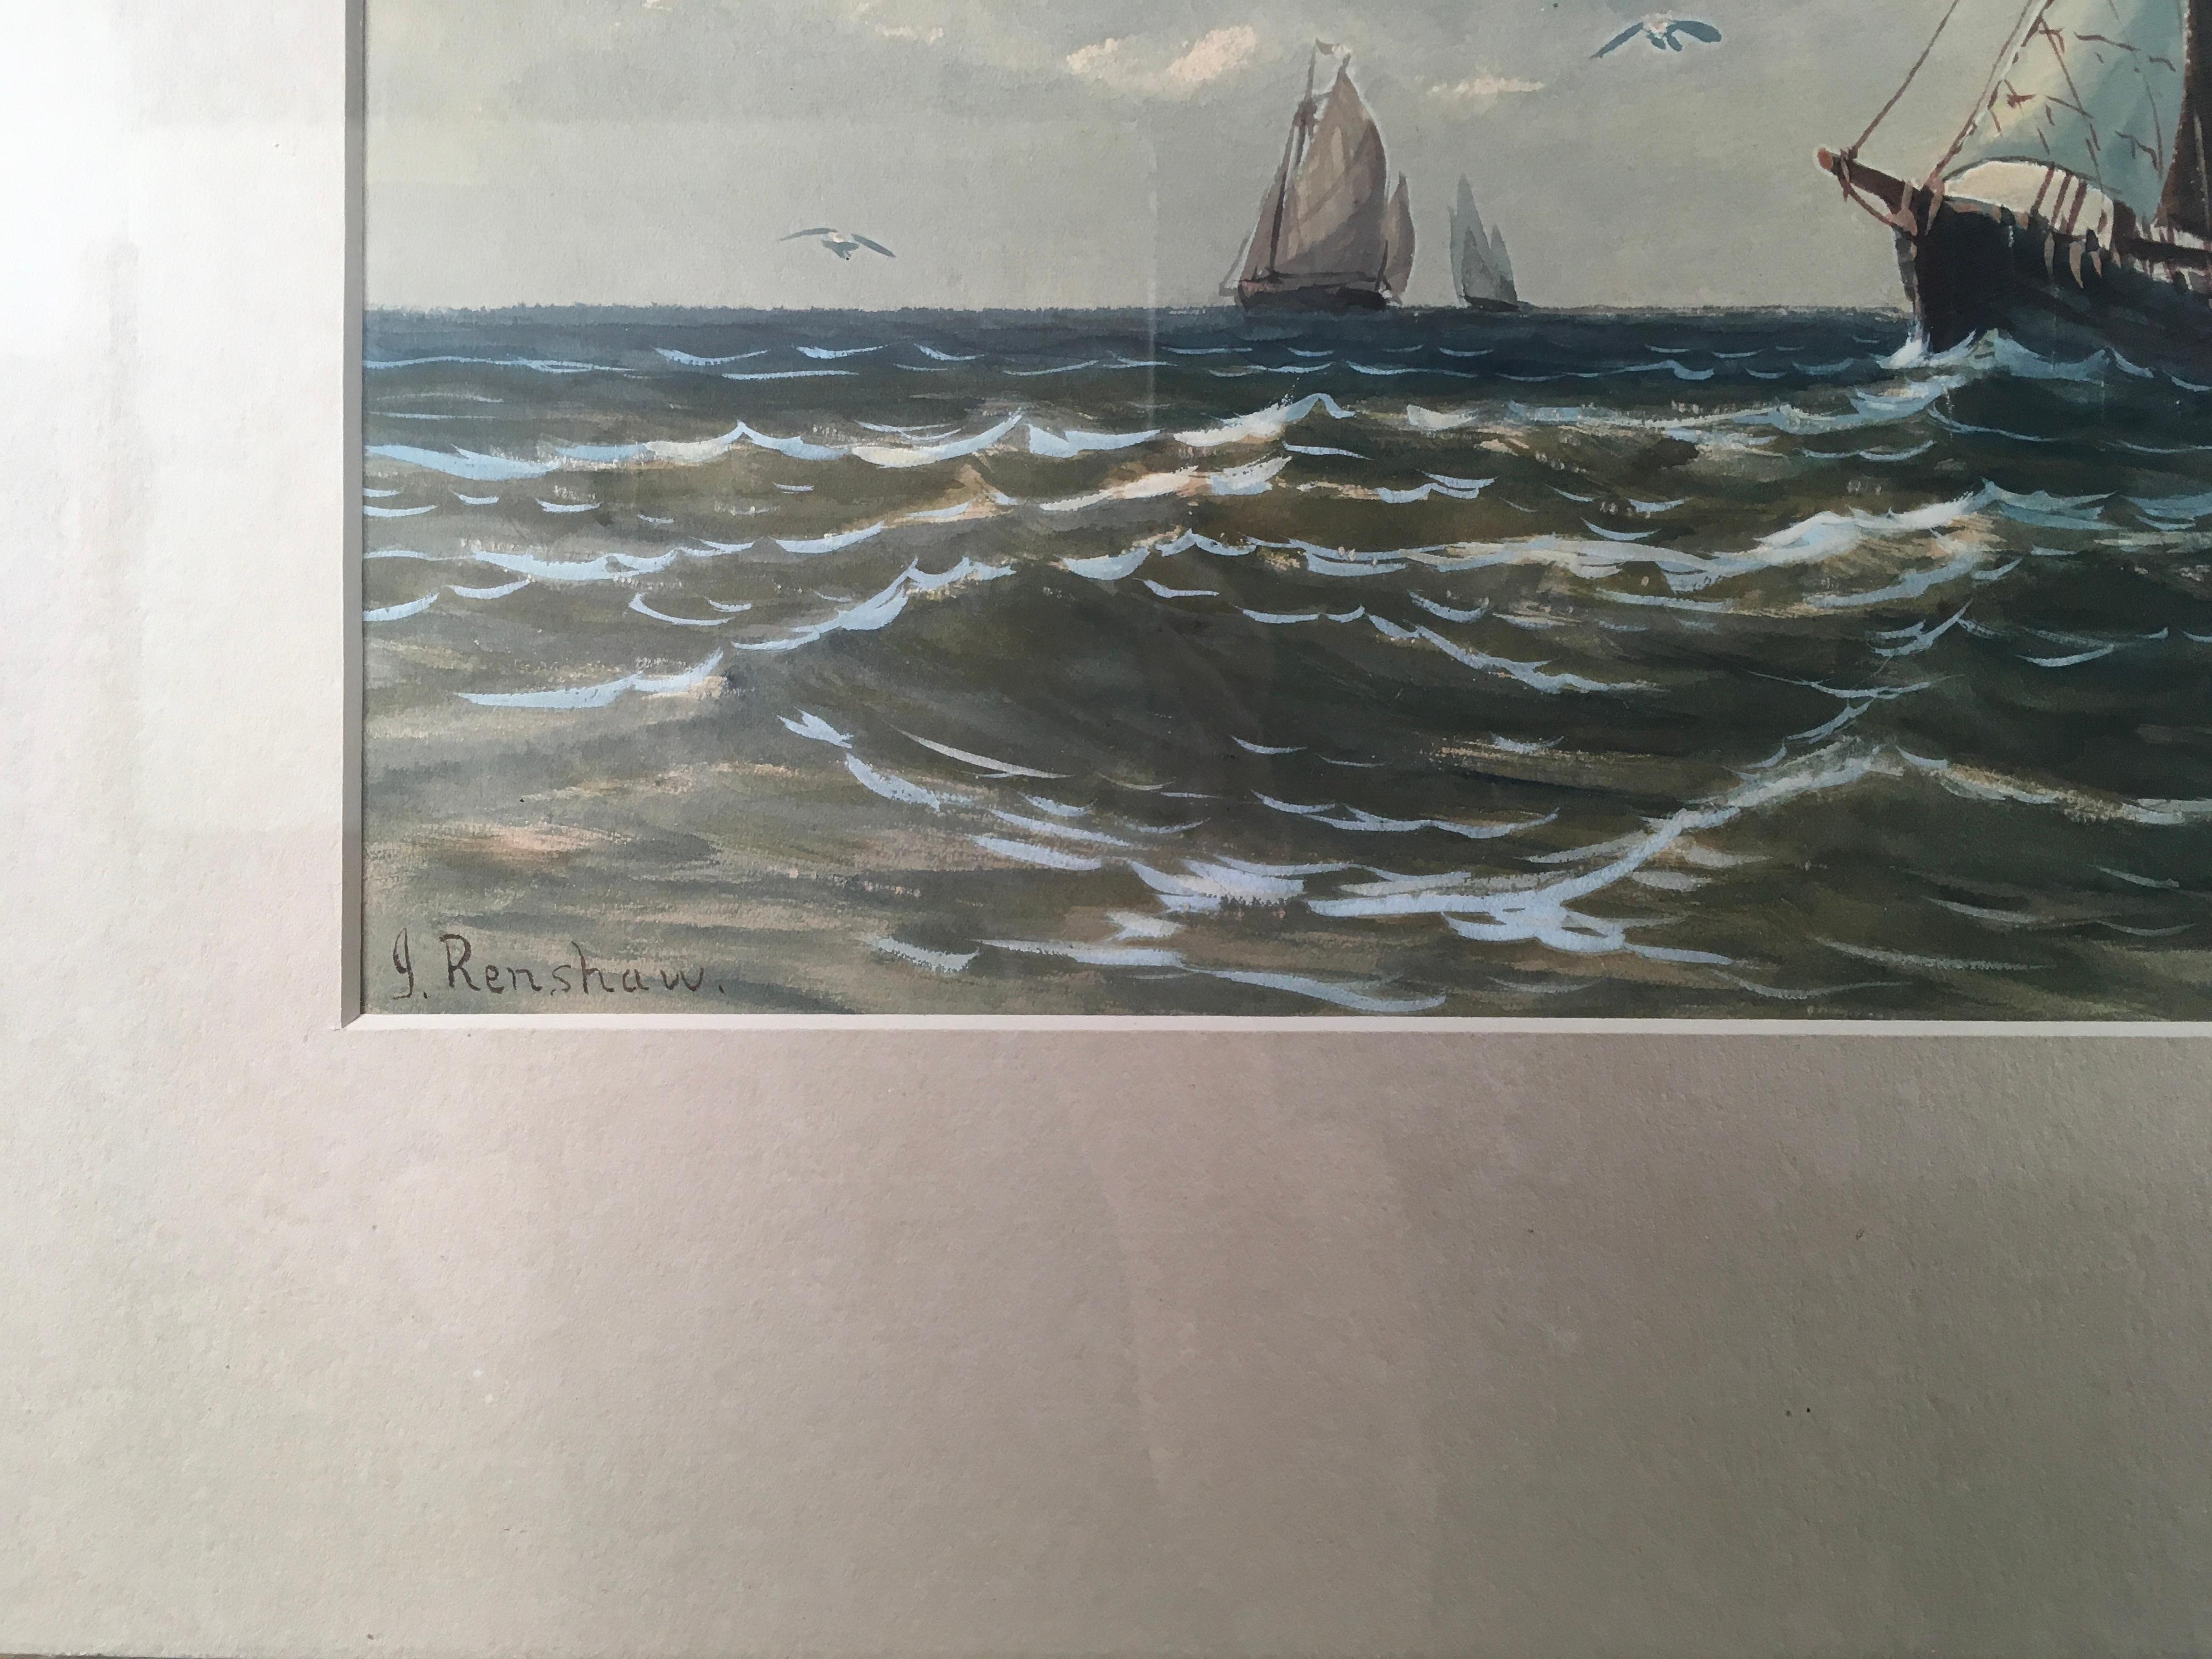 'Sailboats on Windy Waters', by J. Renshaw, Watercolor Painting For Sale 6